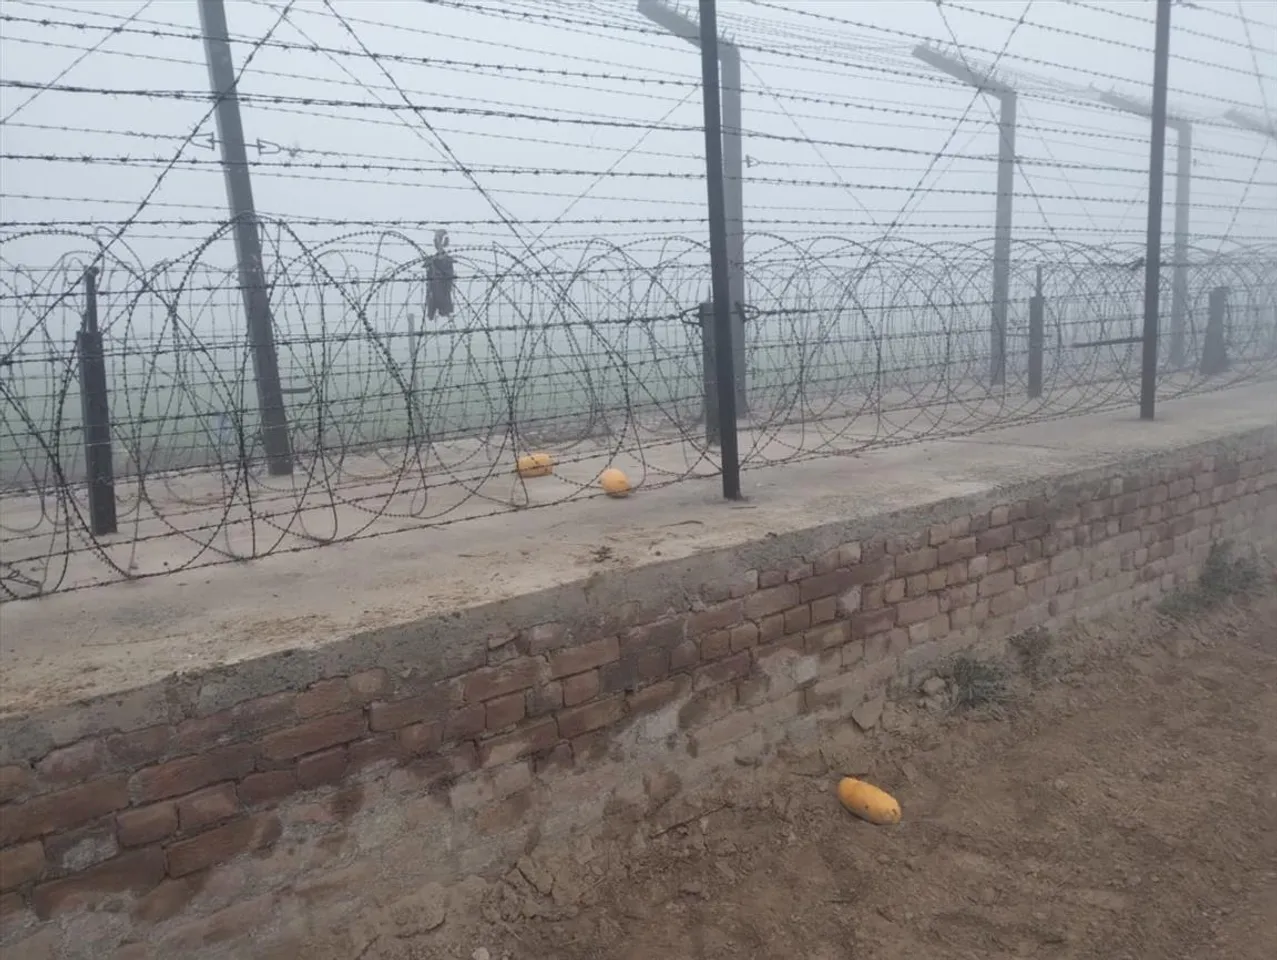 SUSPICIOUS MOVEMENT NEAR BORDER FENCE, FIRING BY BSF TROOPS